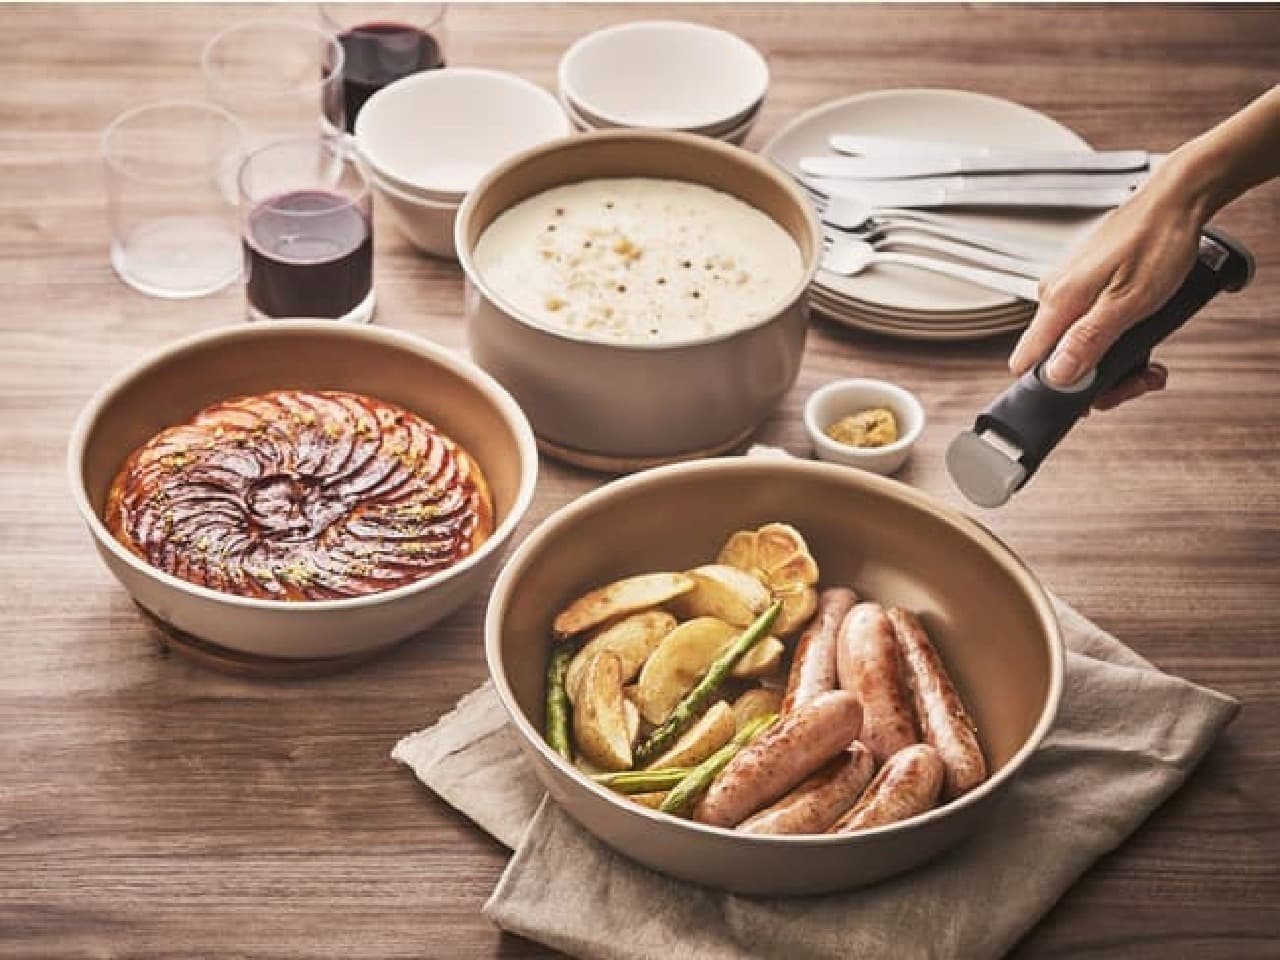 evercook 7-piece removable frying pan and pot set in glaze, compact storage and oven safe